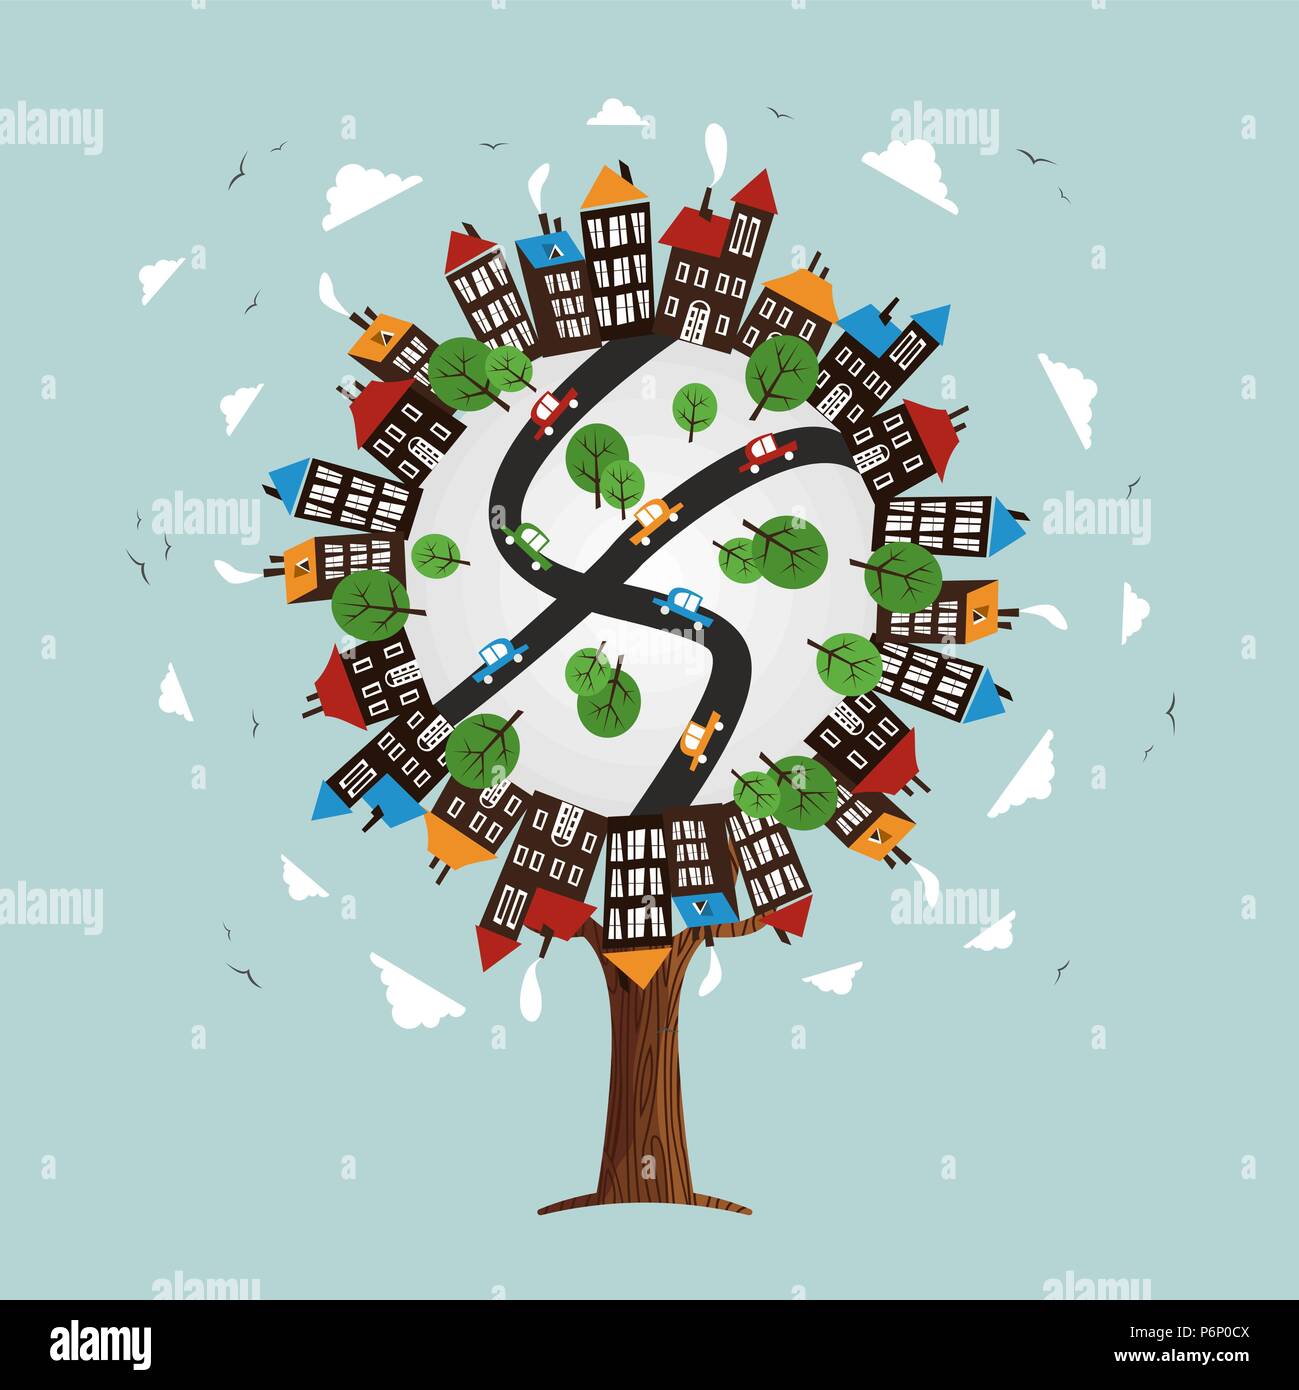 Tree with city landscape world. Illustration concept includes cars, residential houses, street and trees. EPS10 vector. Stock Vector